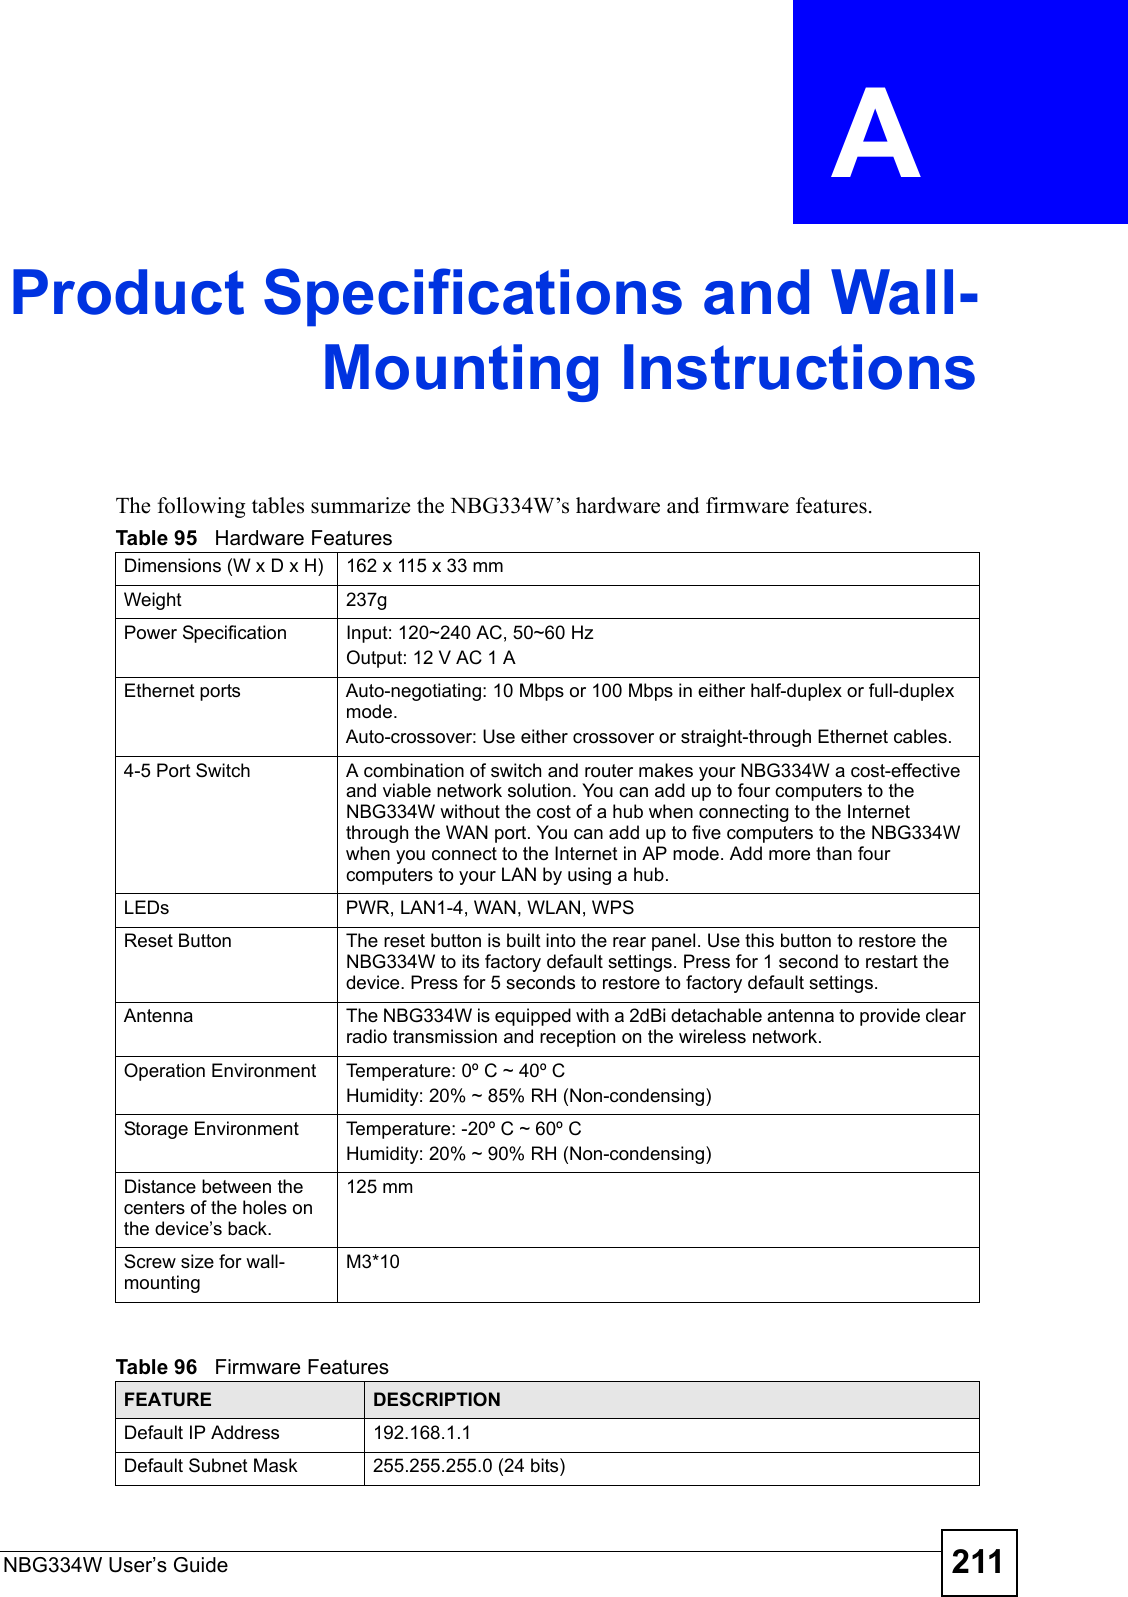 NBG334W User’s Guide 211APPENDIX  A Product Specifications and Wall-Mounting InstructionsThe following tables summarize the NBG334W’s hardware and firmware features.Table 95   Hardware FeaturesDimensions (W x D x H)  162 x 115 x 33 mmWeight 237gPower Specification Input: 120~240 AC, 50~60 HzOutput: 12 V AC 1 AEthernet ports Auto-negotiating: 10 Mbps or 100 Mbps in either half-duplex or full-duplex mode.Auto-crossover: Use either crossover or straight-through Ethernet cables.4-5 Port Switch A combination of switch and router makes your NBG334W a cost-effective and viable network solution. You can add up to four computers to the NBG334W without the cost of a hub when connecting to the Internet through the WAN port. You can add up to five computers to the NBG334W when you connect to the Internet in AP mode. Add more than four computers to your LAN by using a hub.LEDs PWR, LAN1-4, WAN, WLAN, WPSReset Button The reset button is built into the rear panel. Use this button to restore the NBG334W to its factory default settings. Press for 1 second to restart the device. Press for 5 seconds to restore to factory default settings.Antenna The NBG334W is equipped with a 2dBi detachable antenna to provide clear radio transmission and reception on the wireless network. Operation Environment Temperature: 0º C ~ 40º CHumidity: 20% ~ 85% RH (Non-condensing)Storage Environment Temperature: -20º C ~ 60º CHumidity: 20% ~ 90% RH (Non-condensing)Distance between the centers of the holes on the device’s back.125 mmScrew size for wall-mountingM3*10Table 96   Firmware FeaturesFEATURE DESCRIPTIONDefault IP Address 192.168.1.1Default Subnet Mask 255.255.255.0 (24 bits)